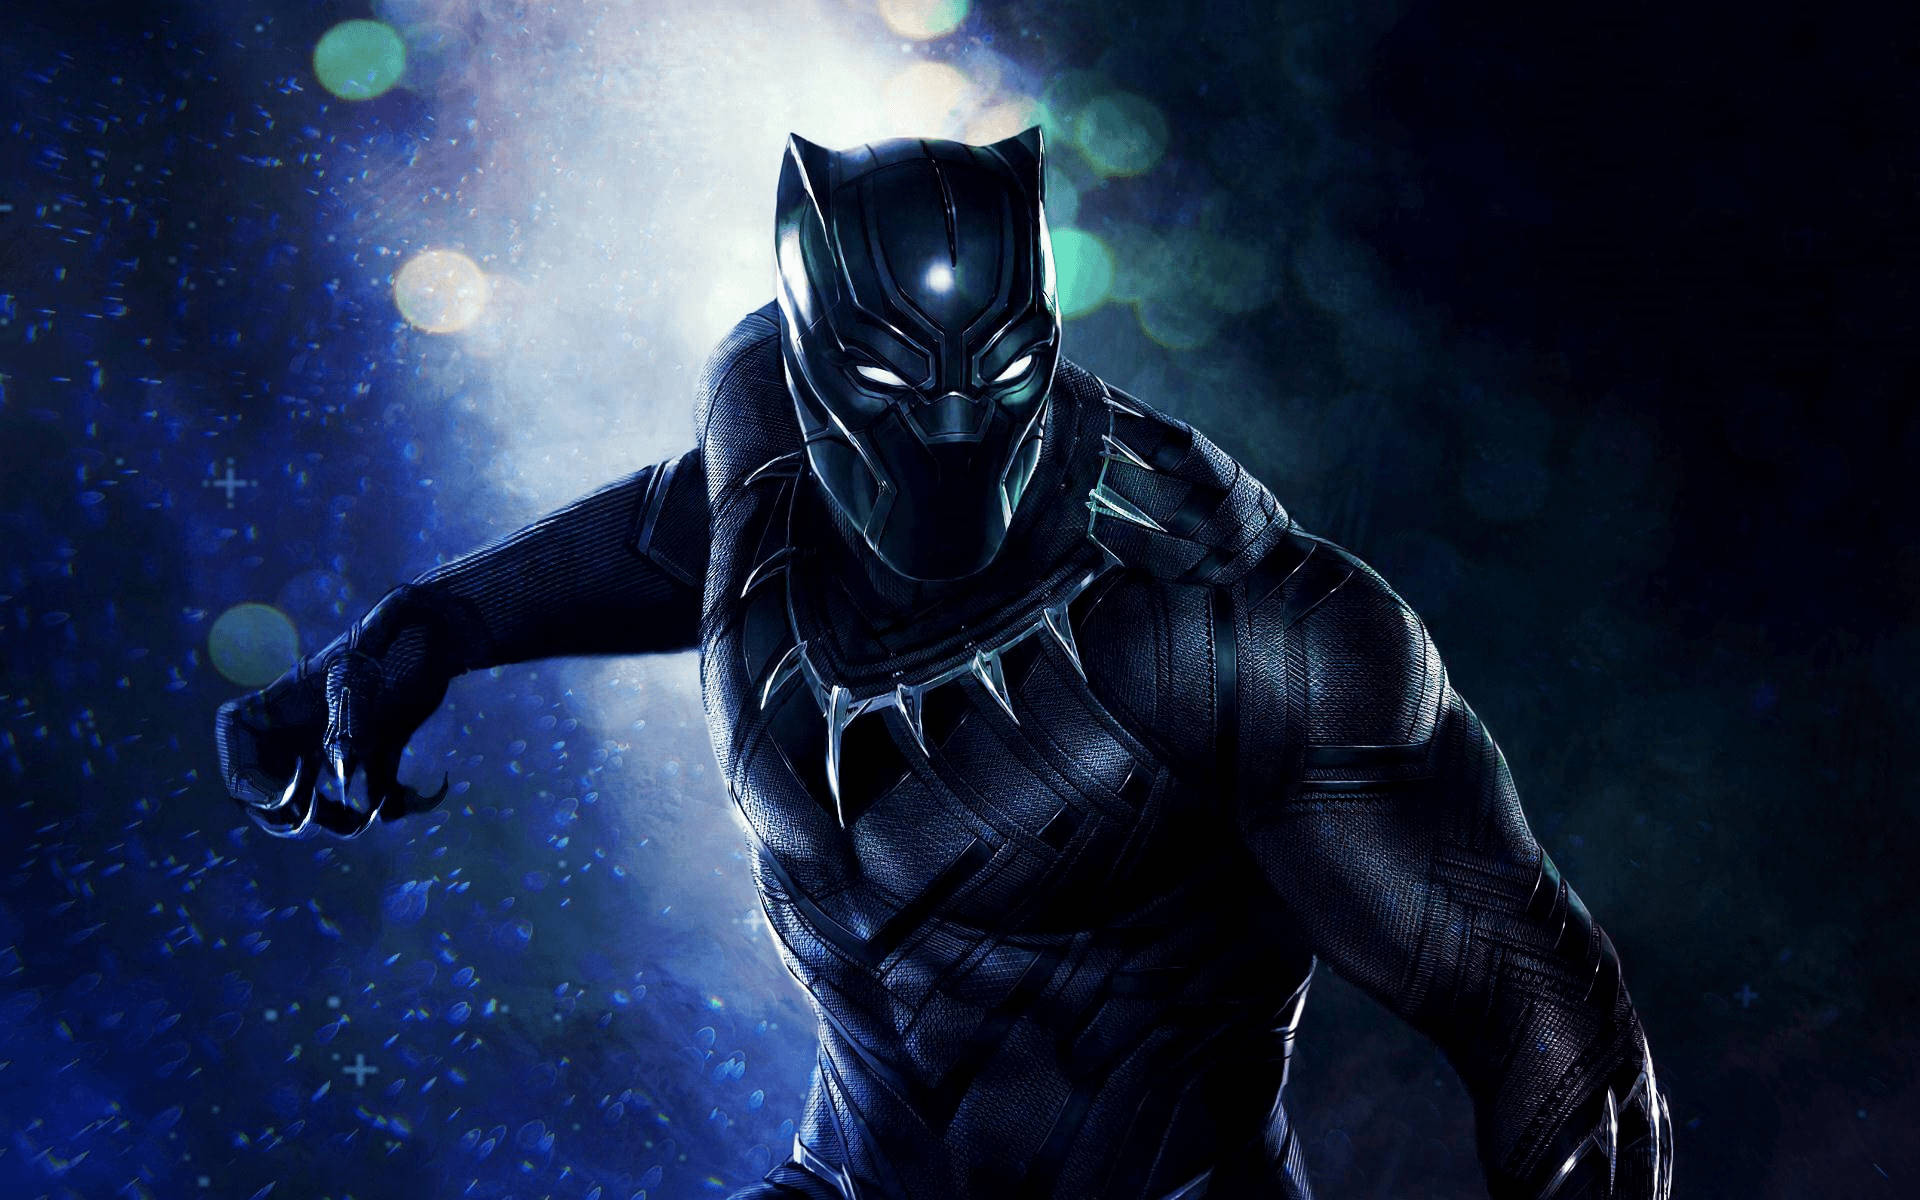 Aesthetic Black Panther Theme